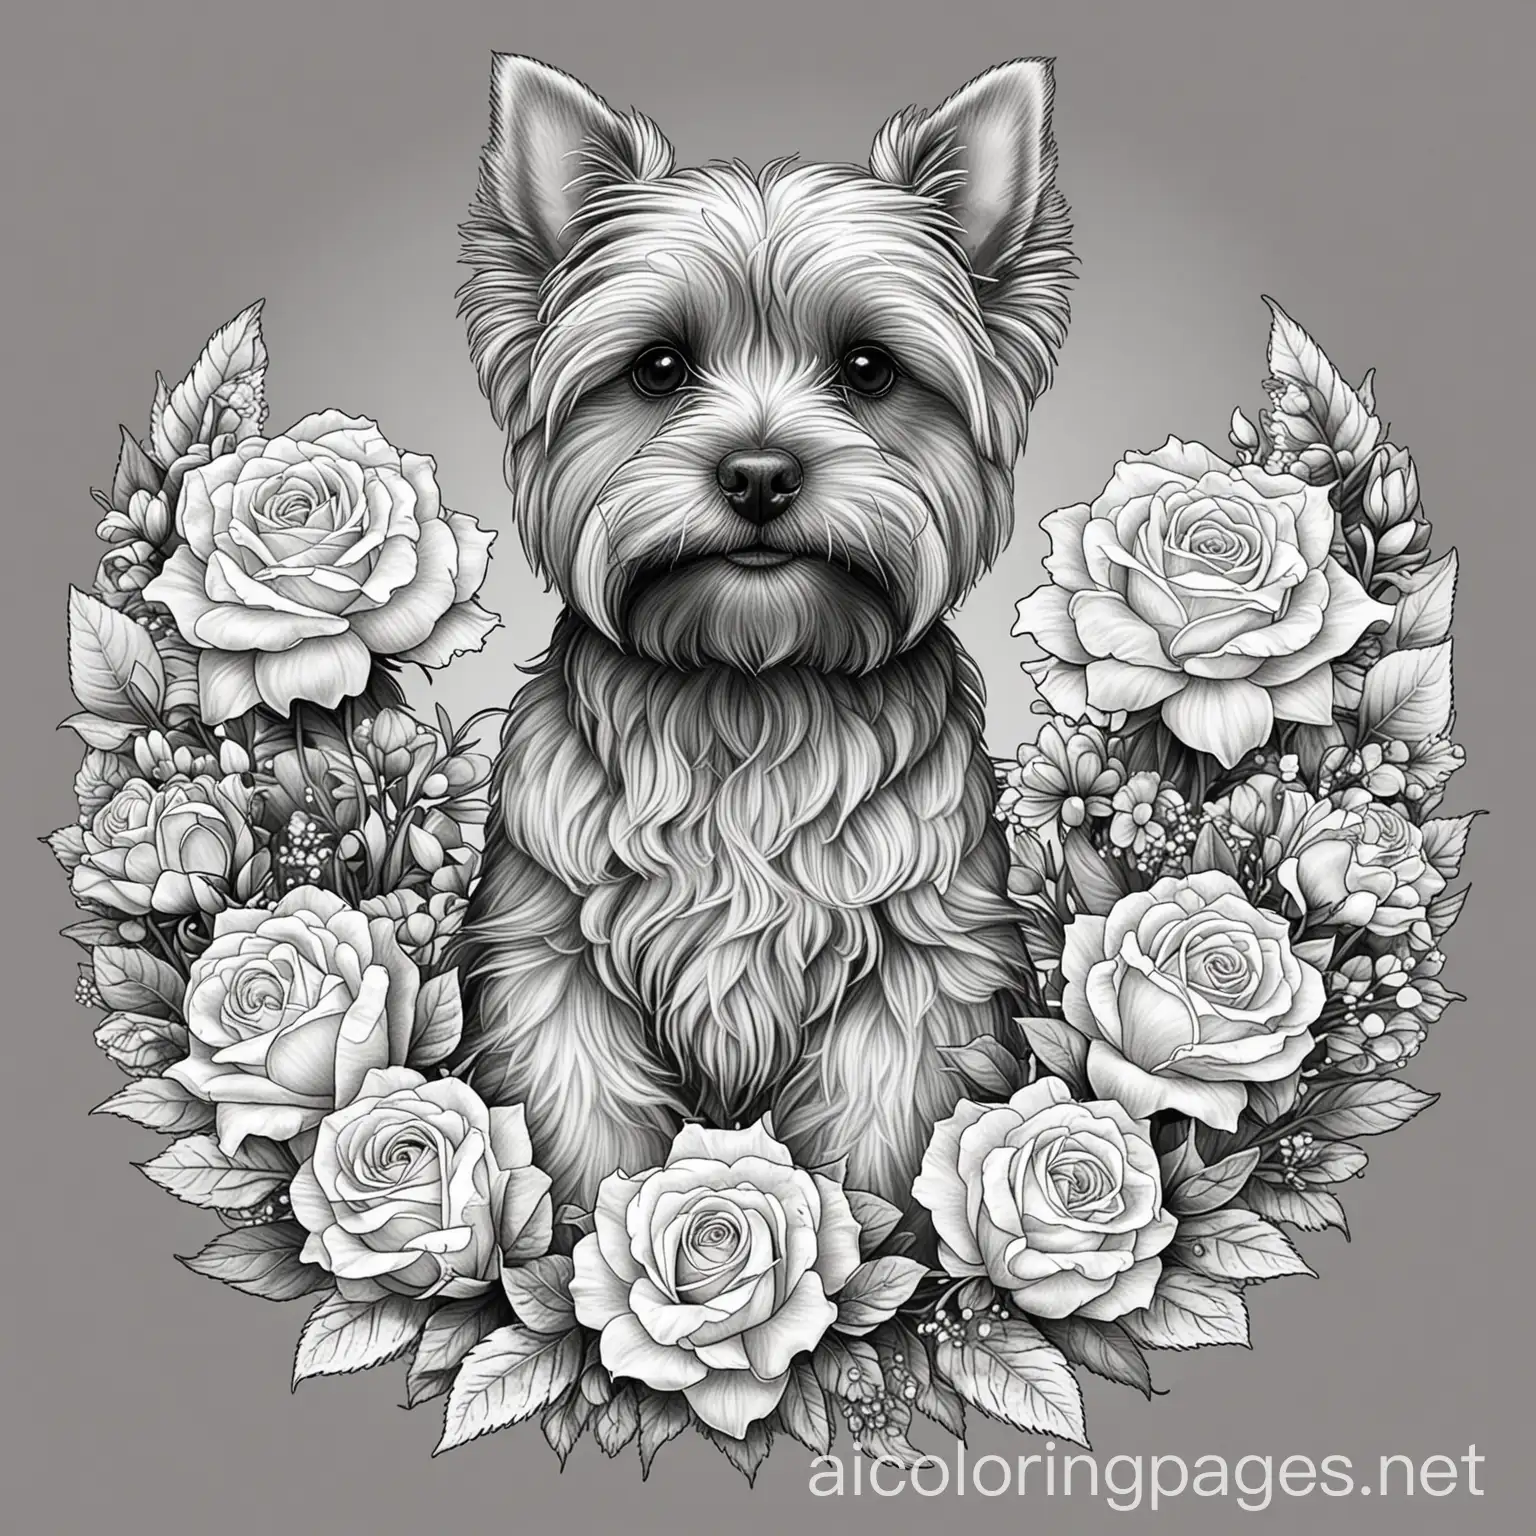 Yorkshire-Terrier-Holding-Bouquet-Coloring-Page-with-White-Roses